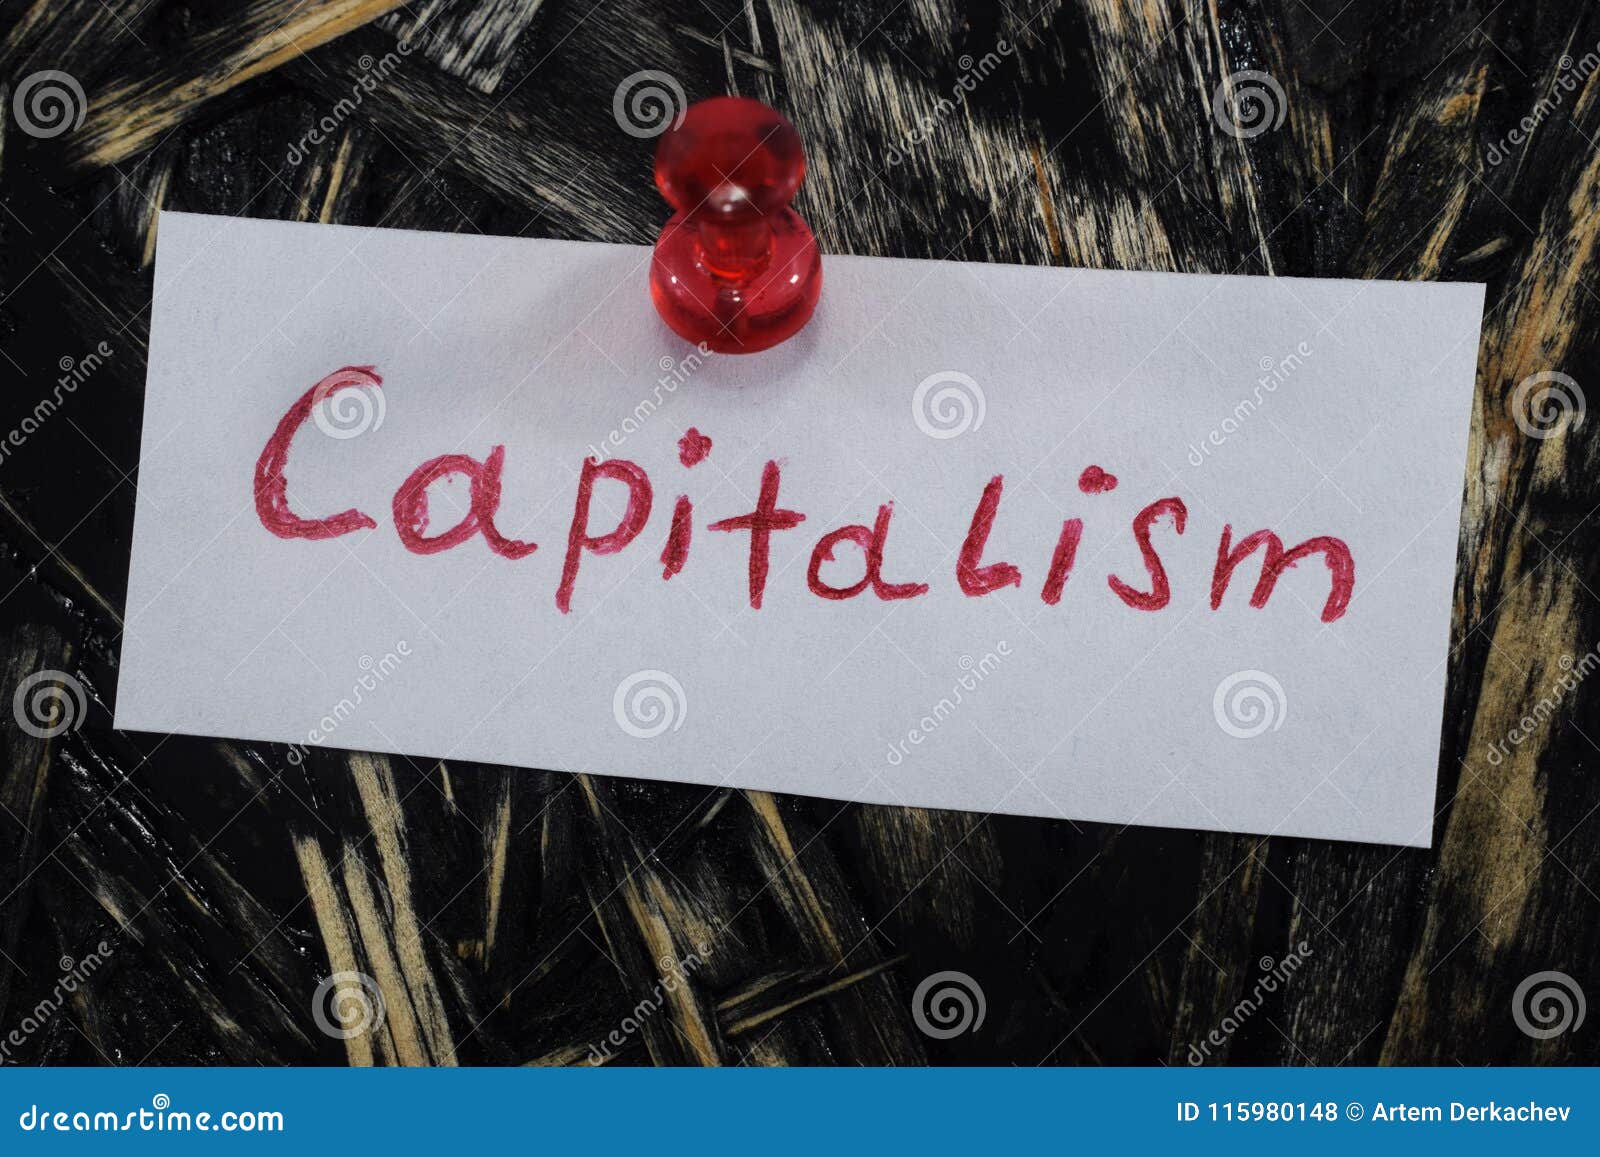 a simple and understandable inscription, capitalism